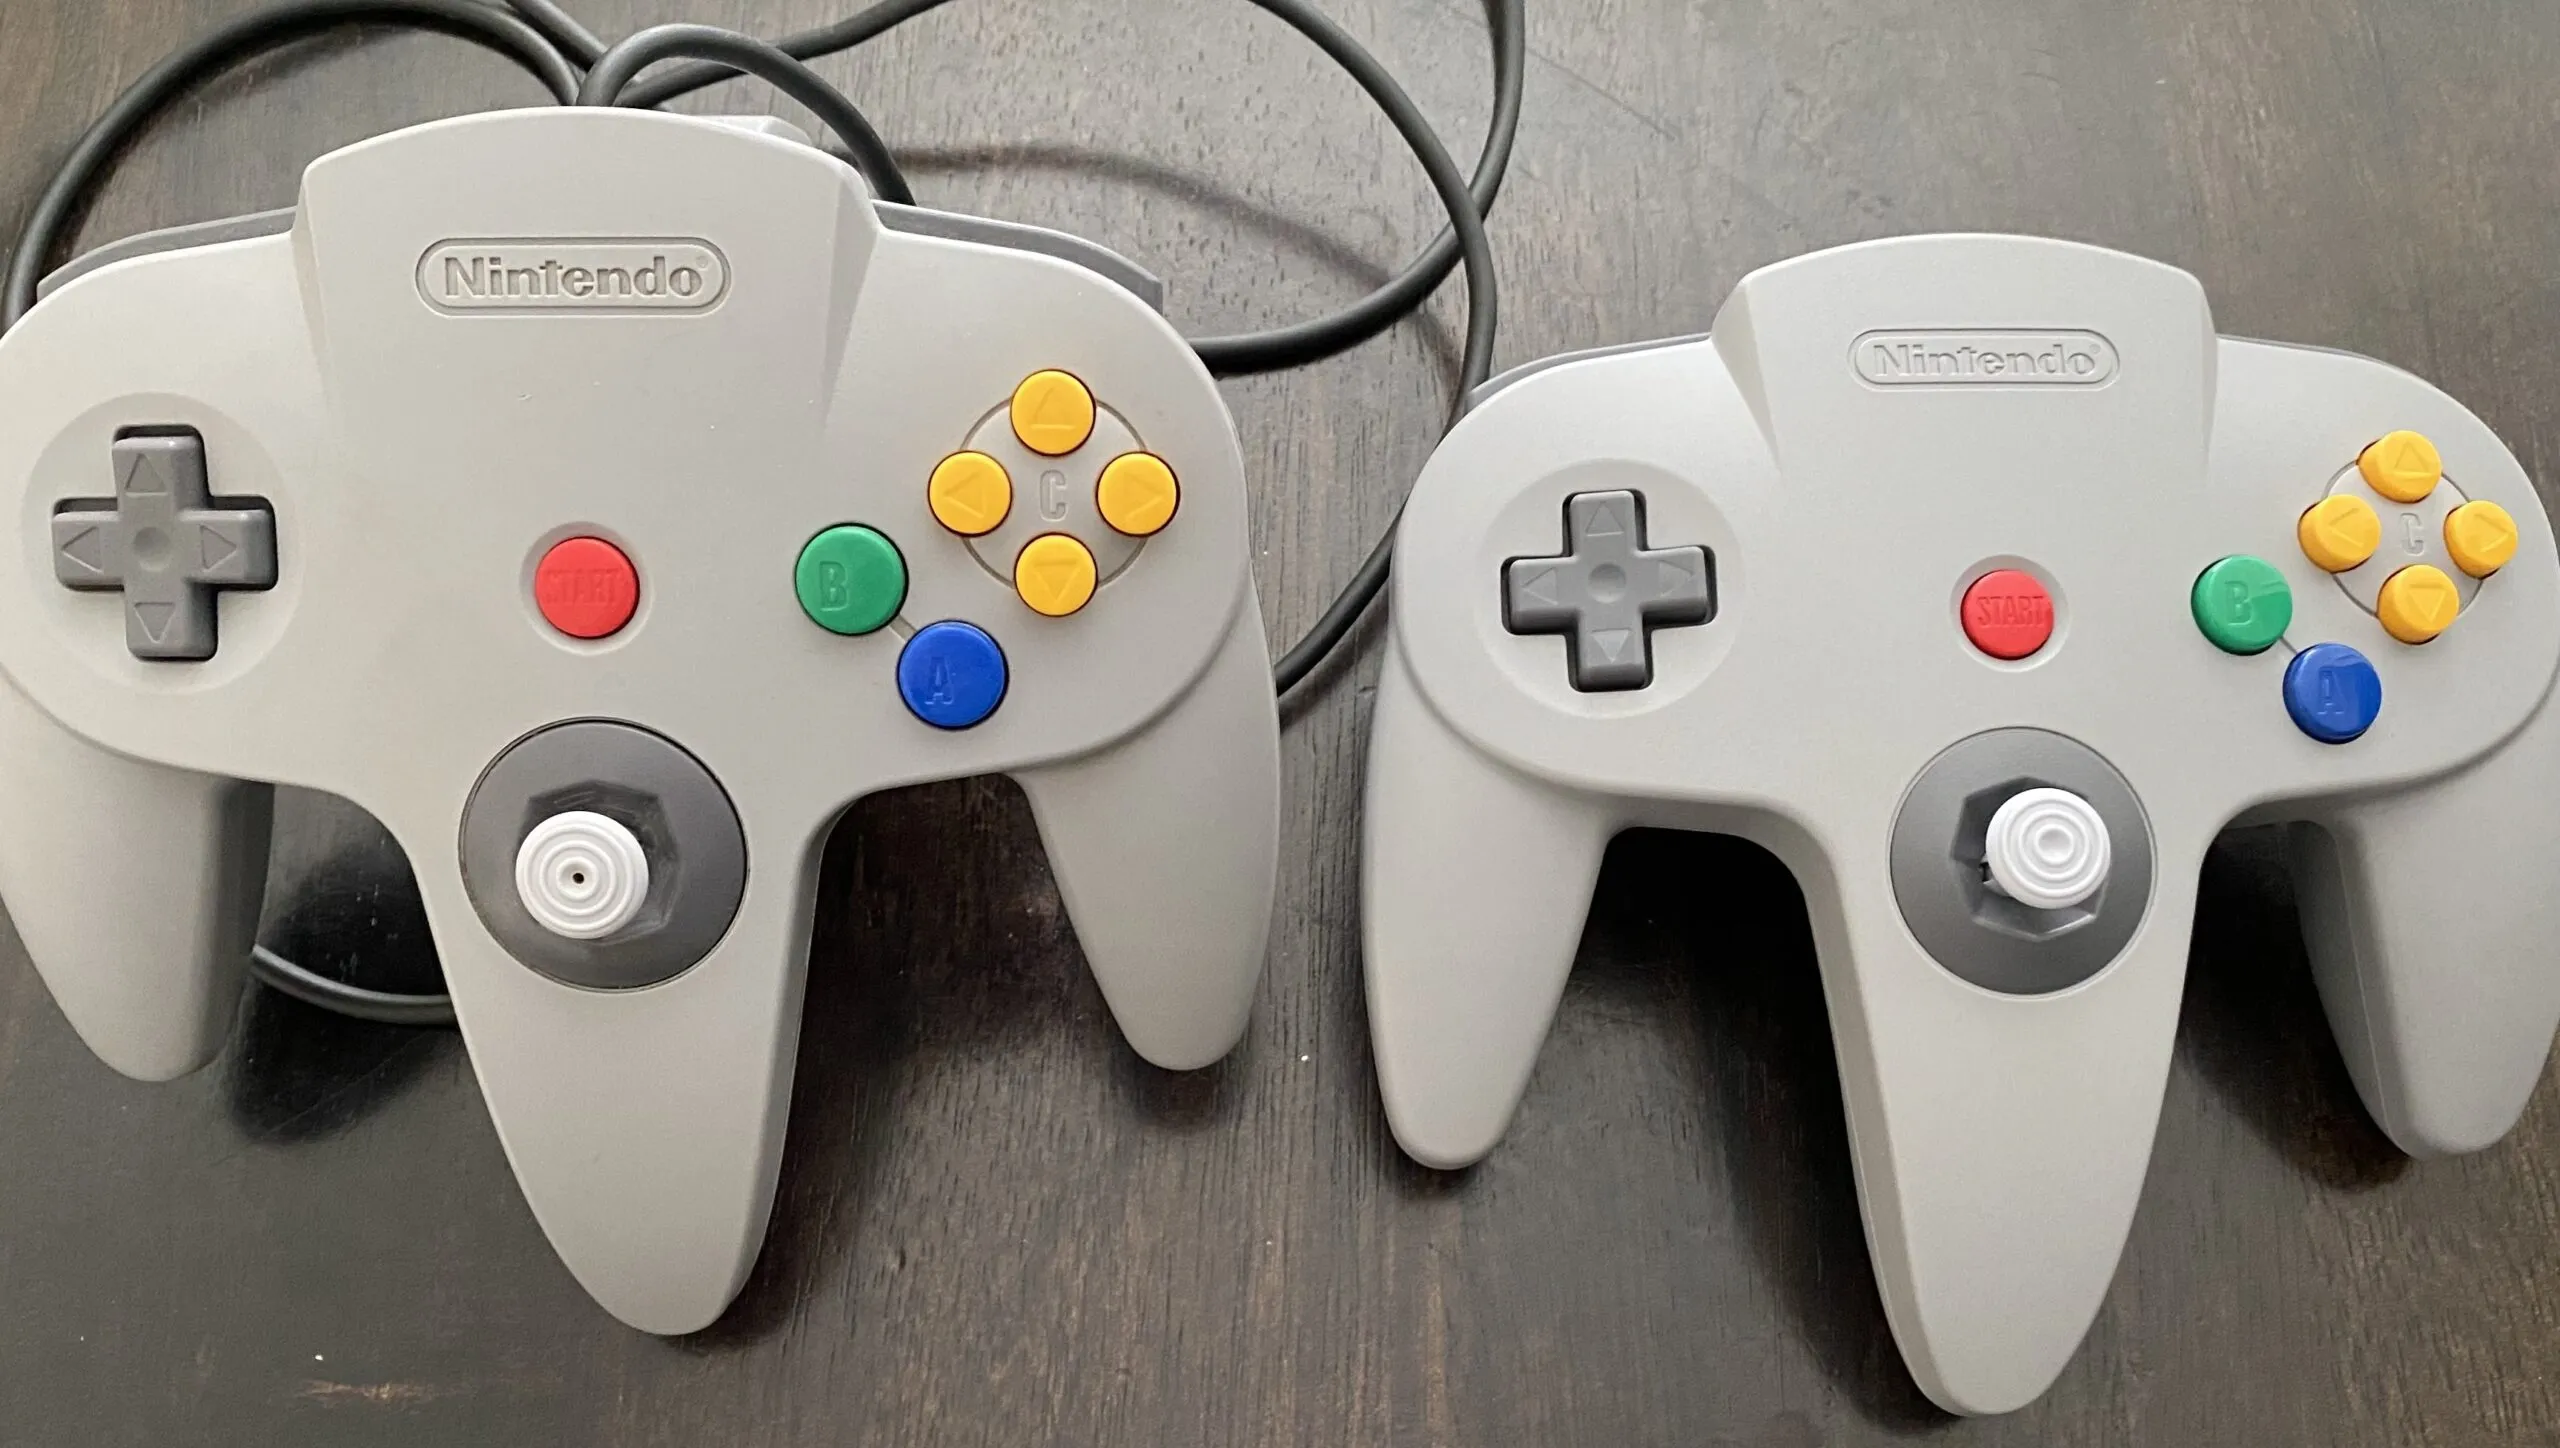 can you play nes emulators on a mac using ps4 controller